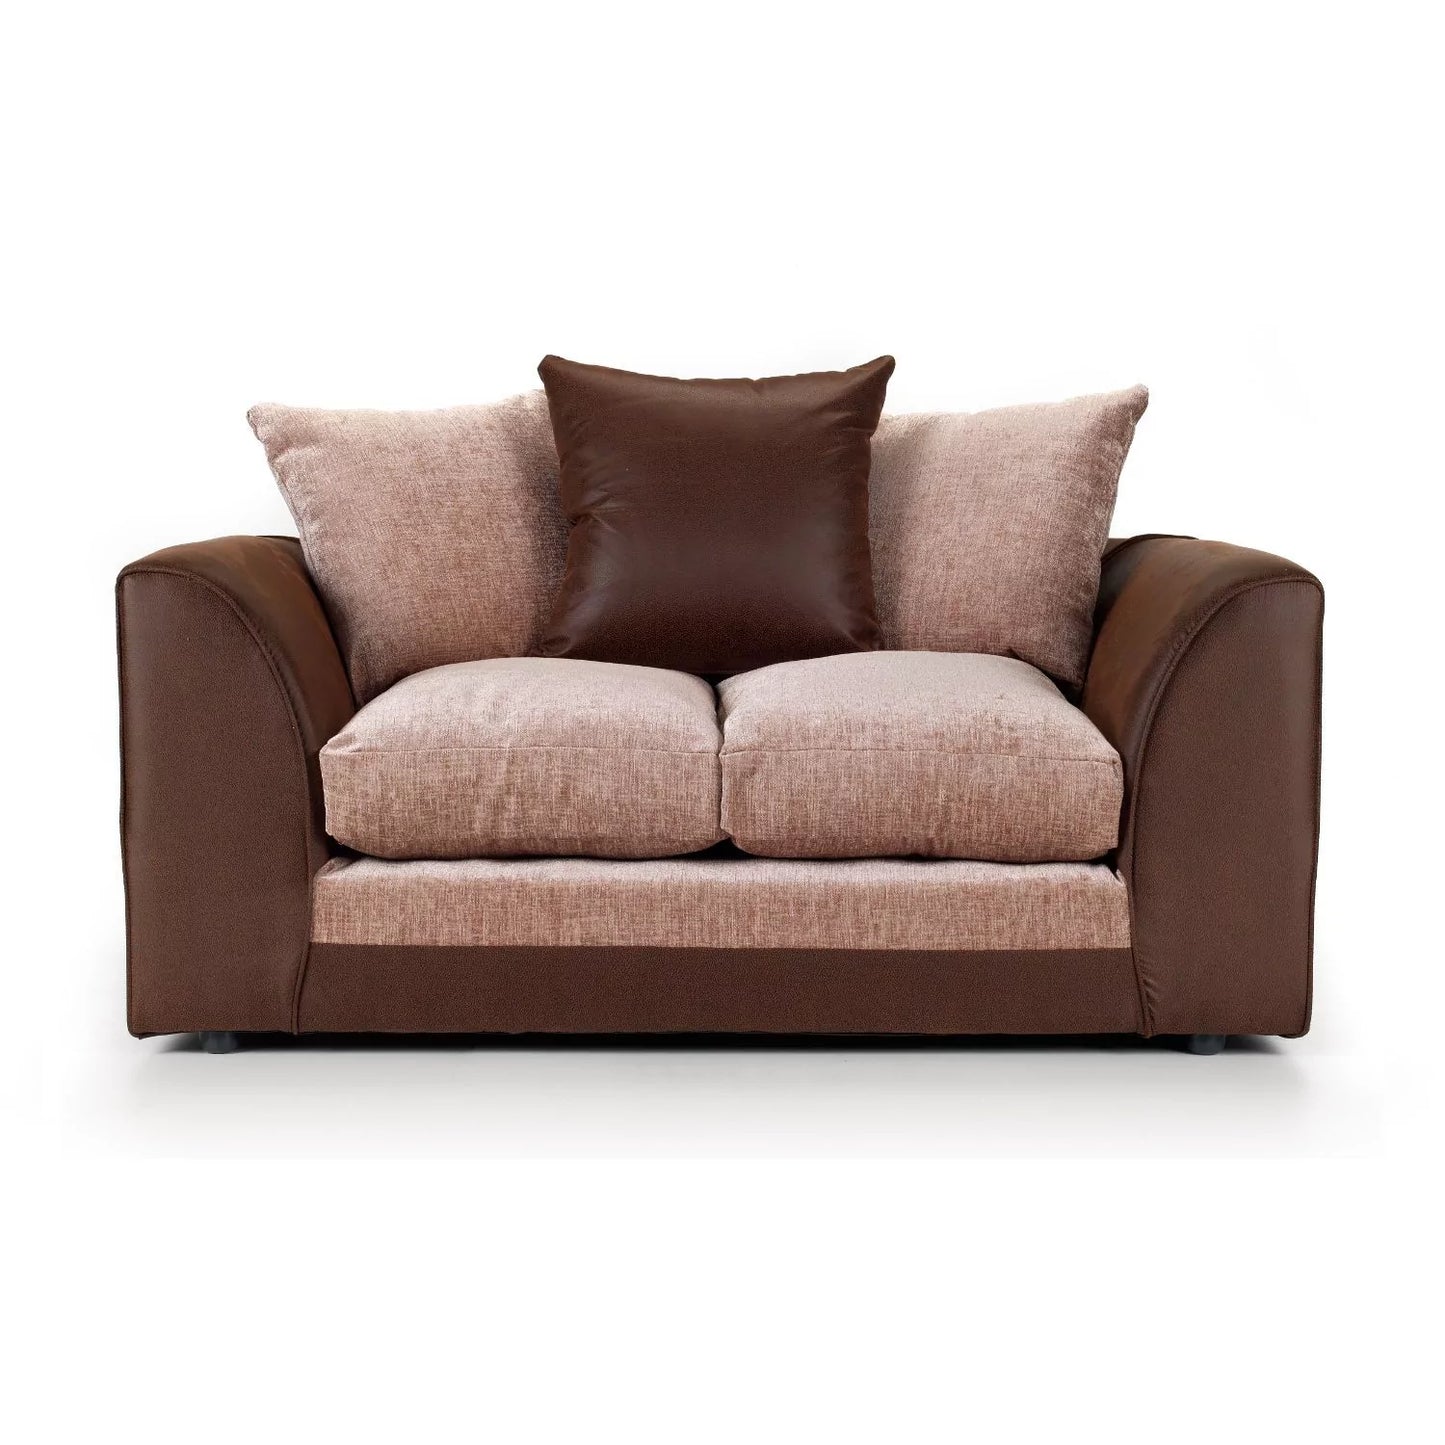 Aruba Fabric 3 Seater and 2 Seater Sofa Set - Brown and Beige